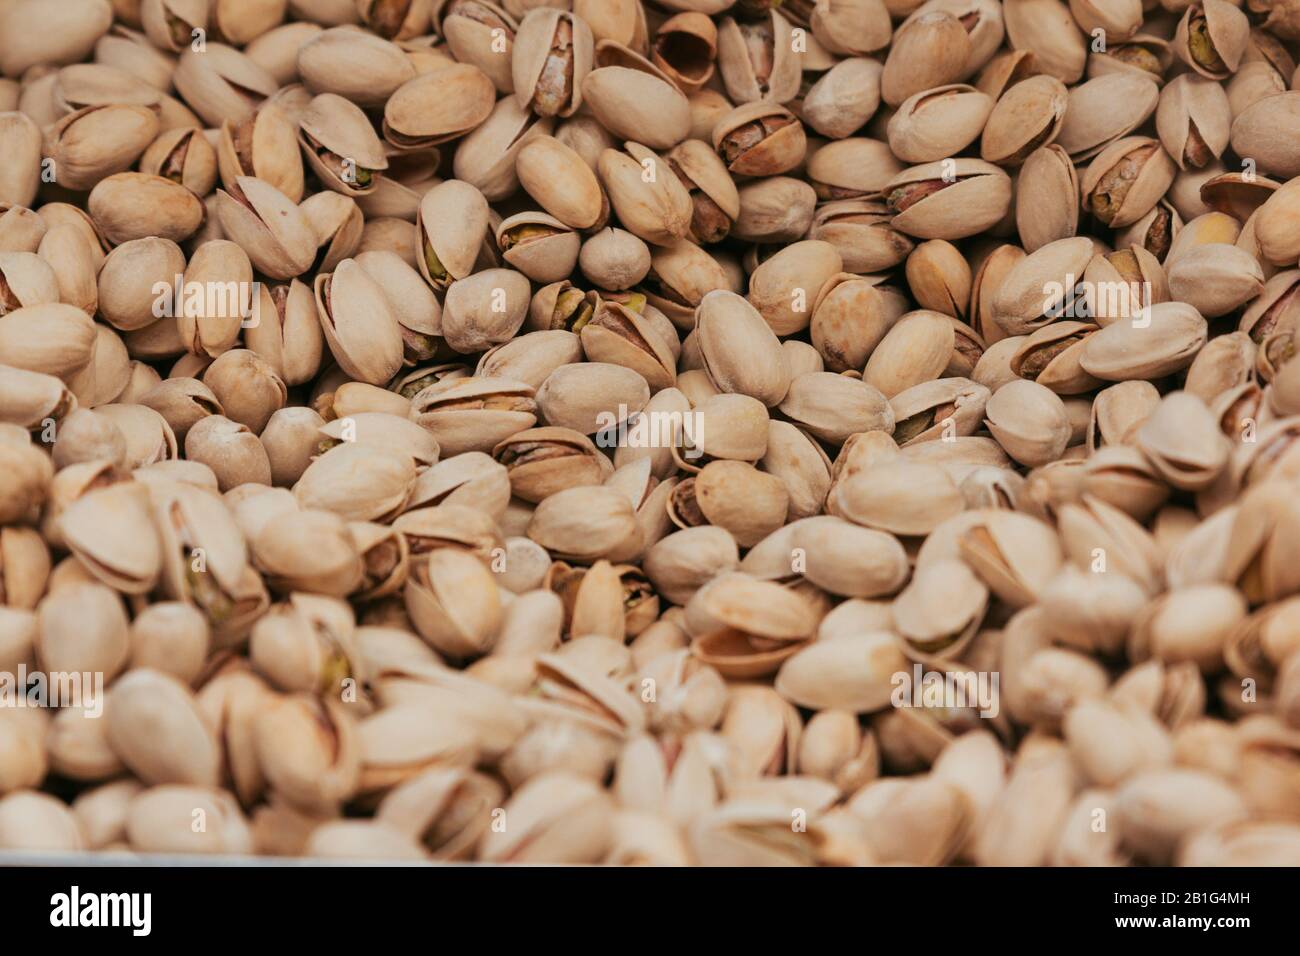 Stock photo of a close shot of a pile of delicious pistachios in a market stand creating a texture Stock Photo